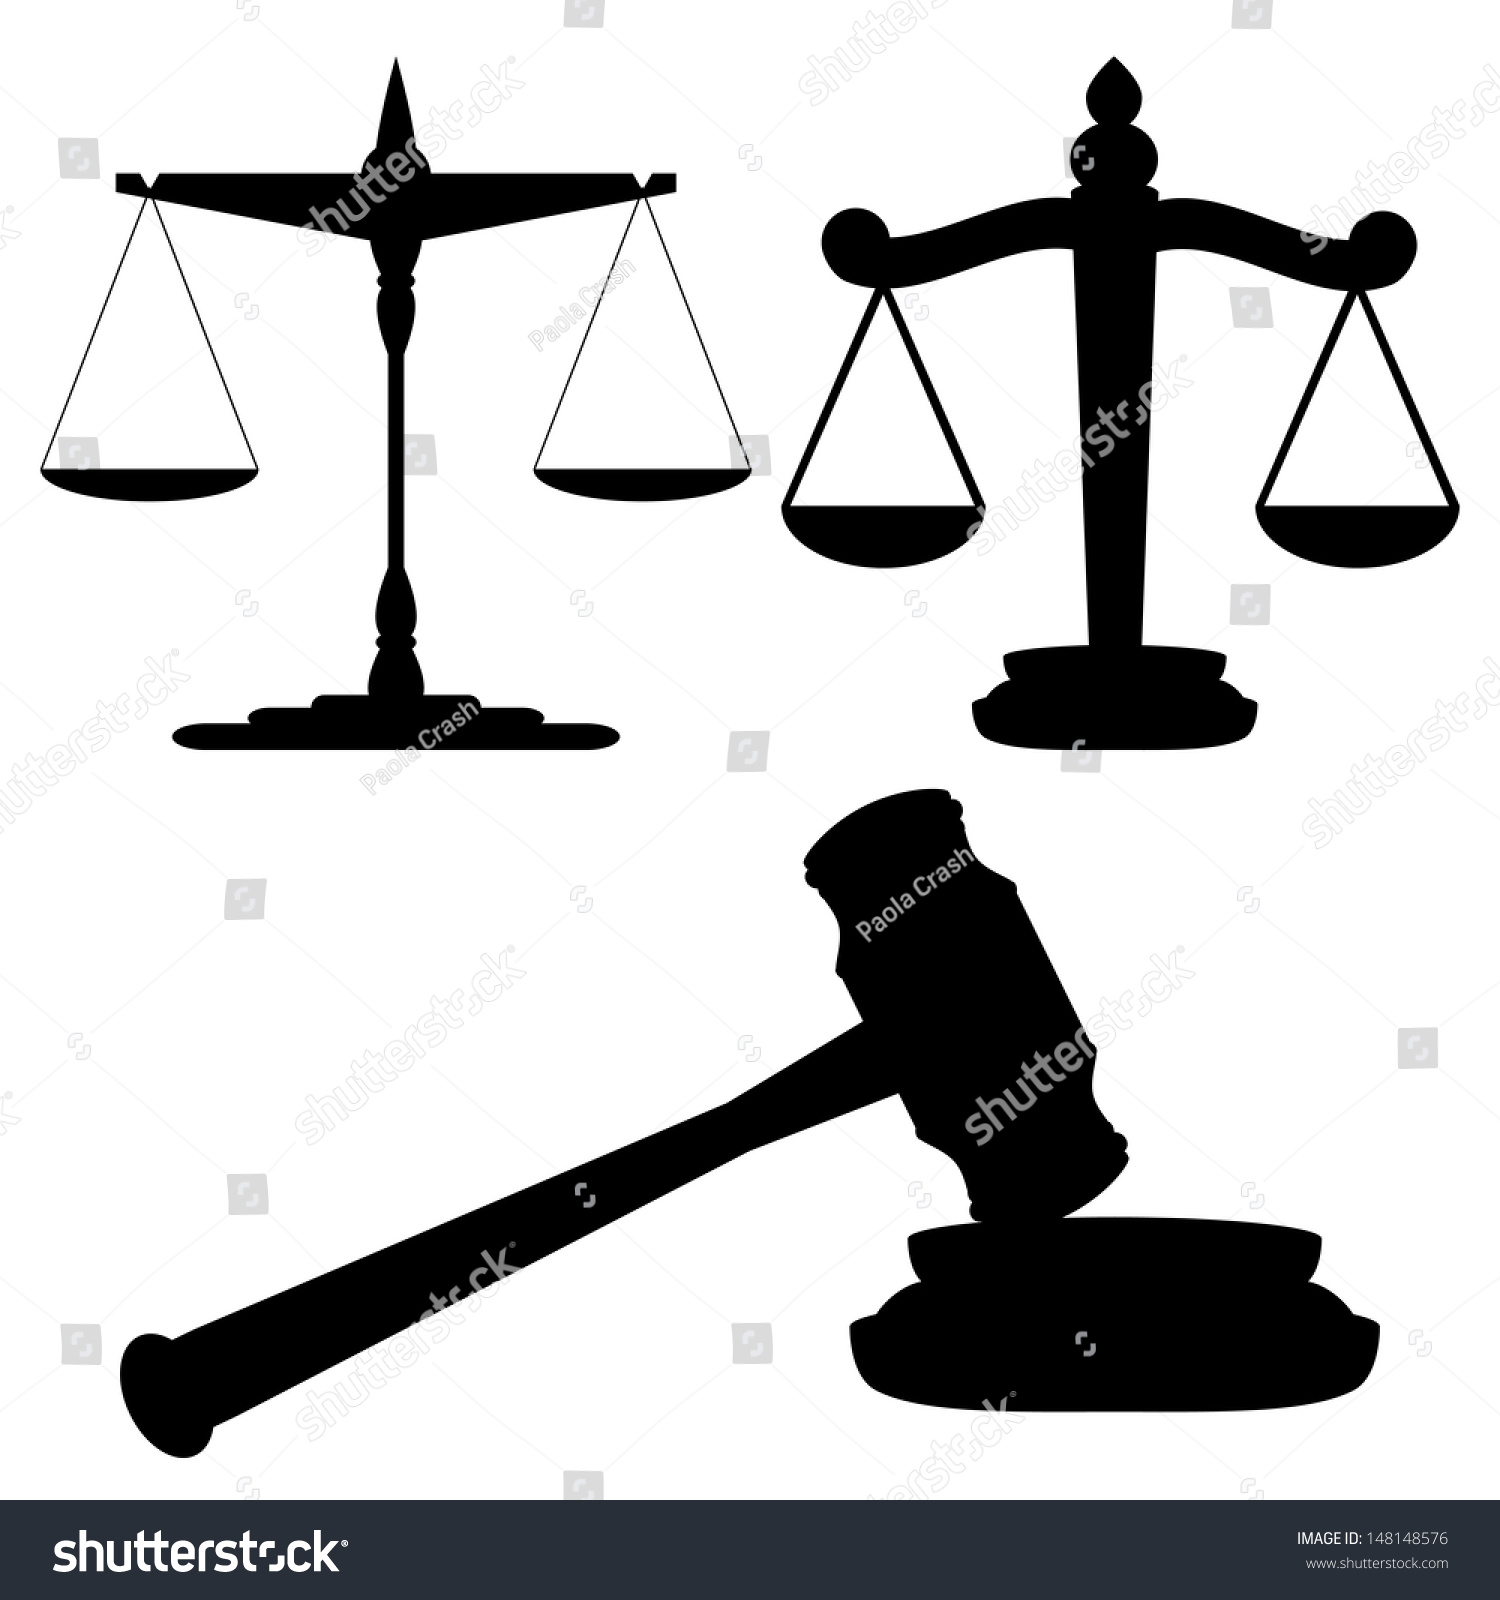 Scales Of Justice And Gavel Stock Photo 148148576 ...